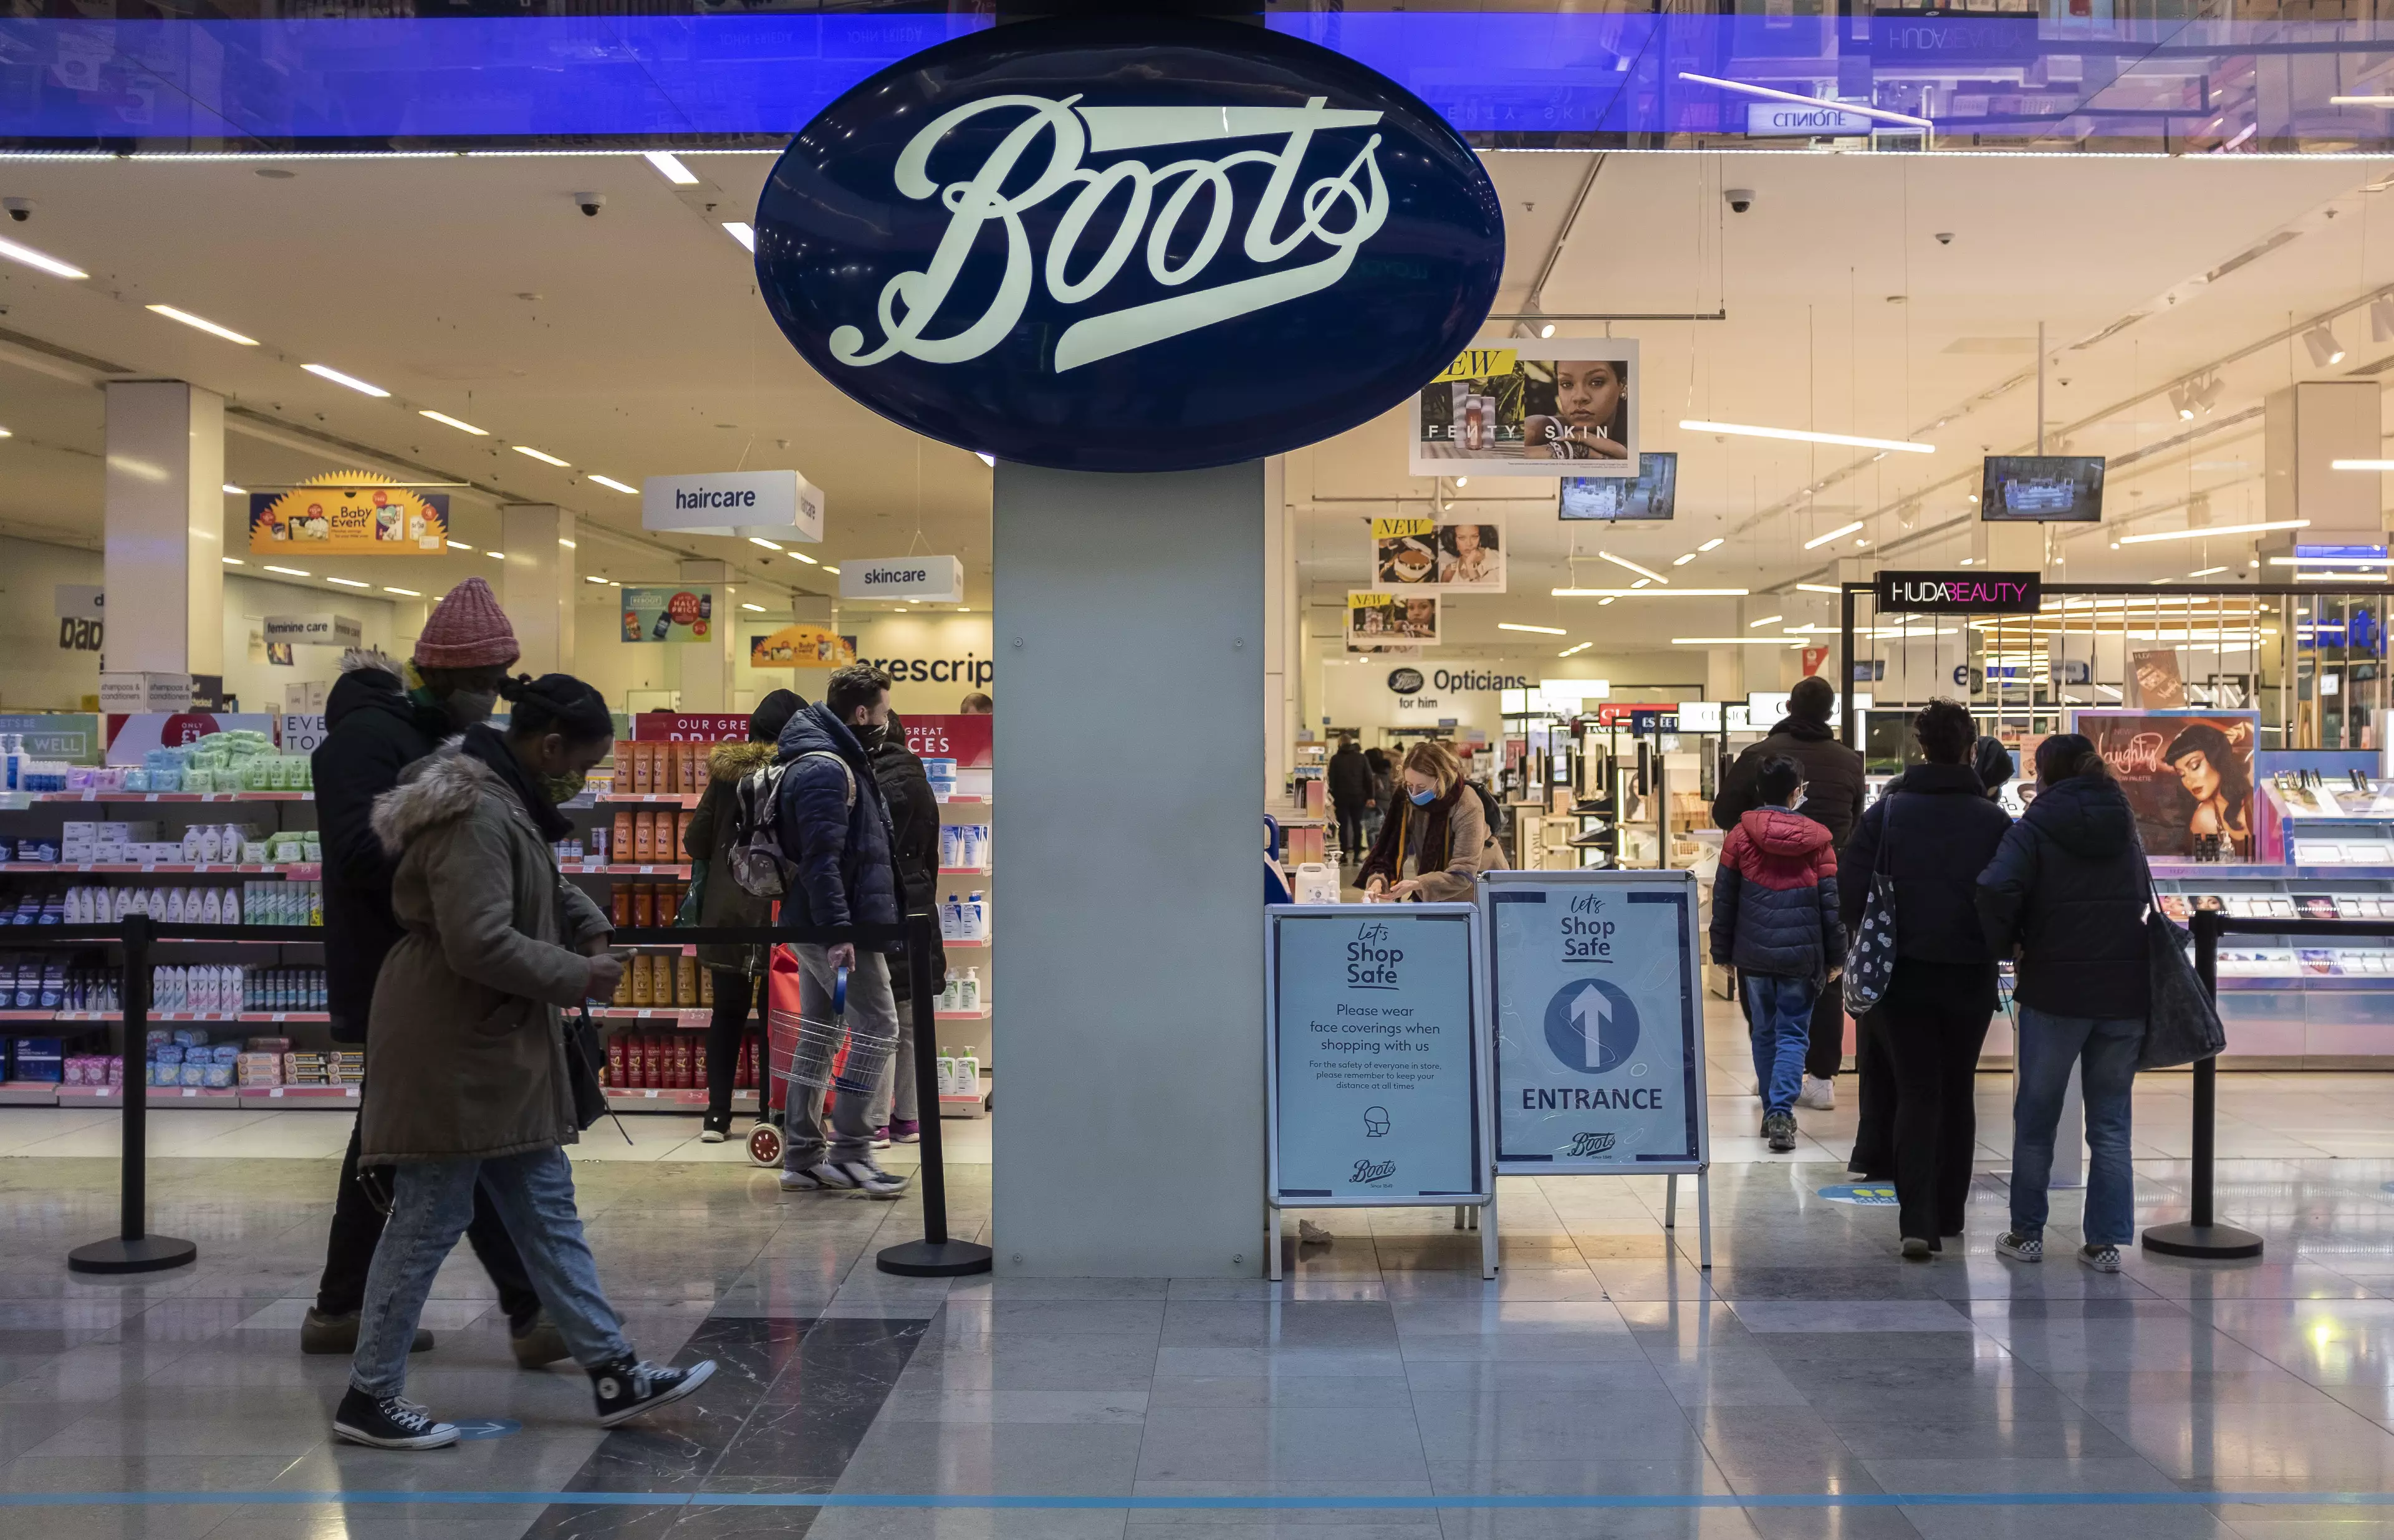 Boots is one of the high street pharmacies offering the pill (